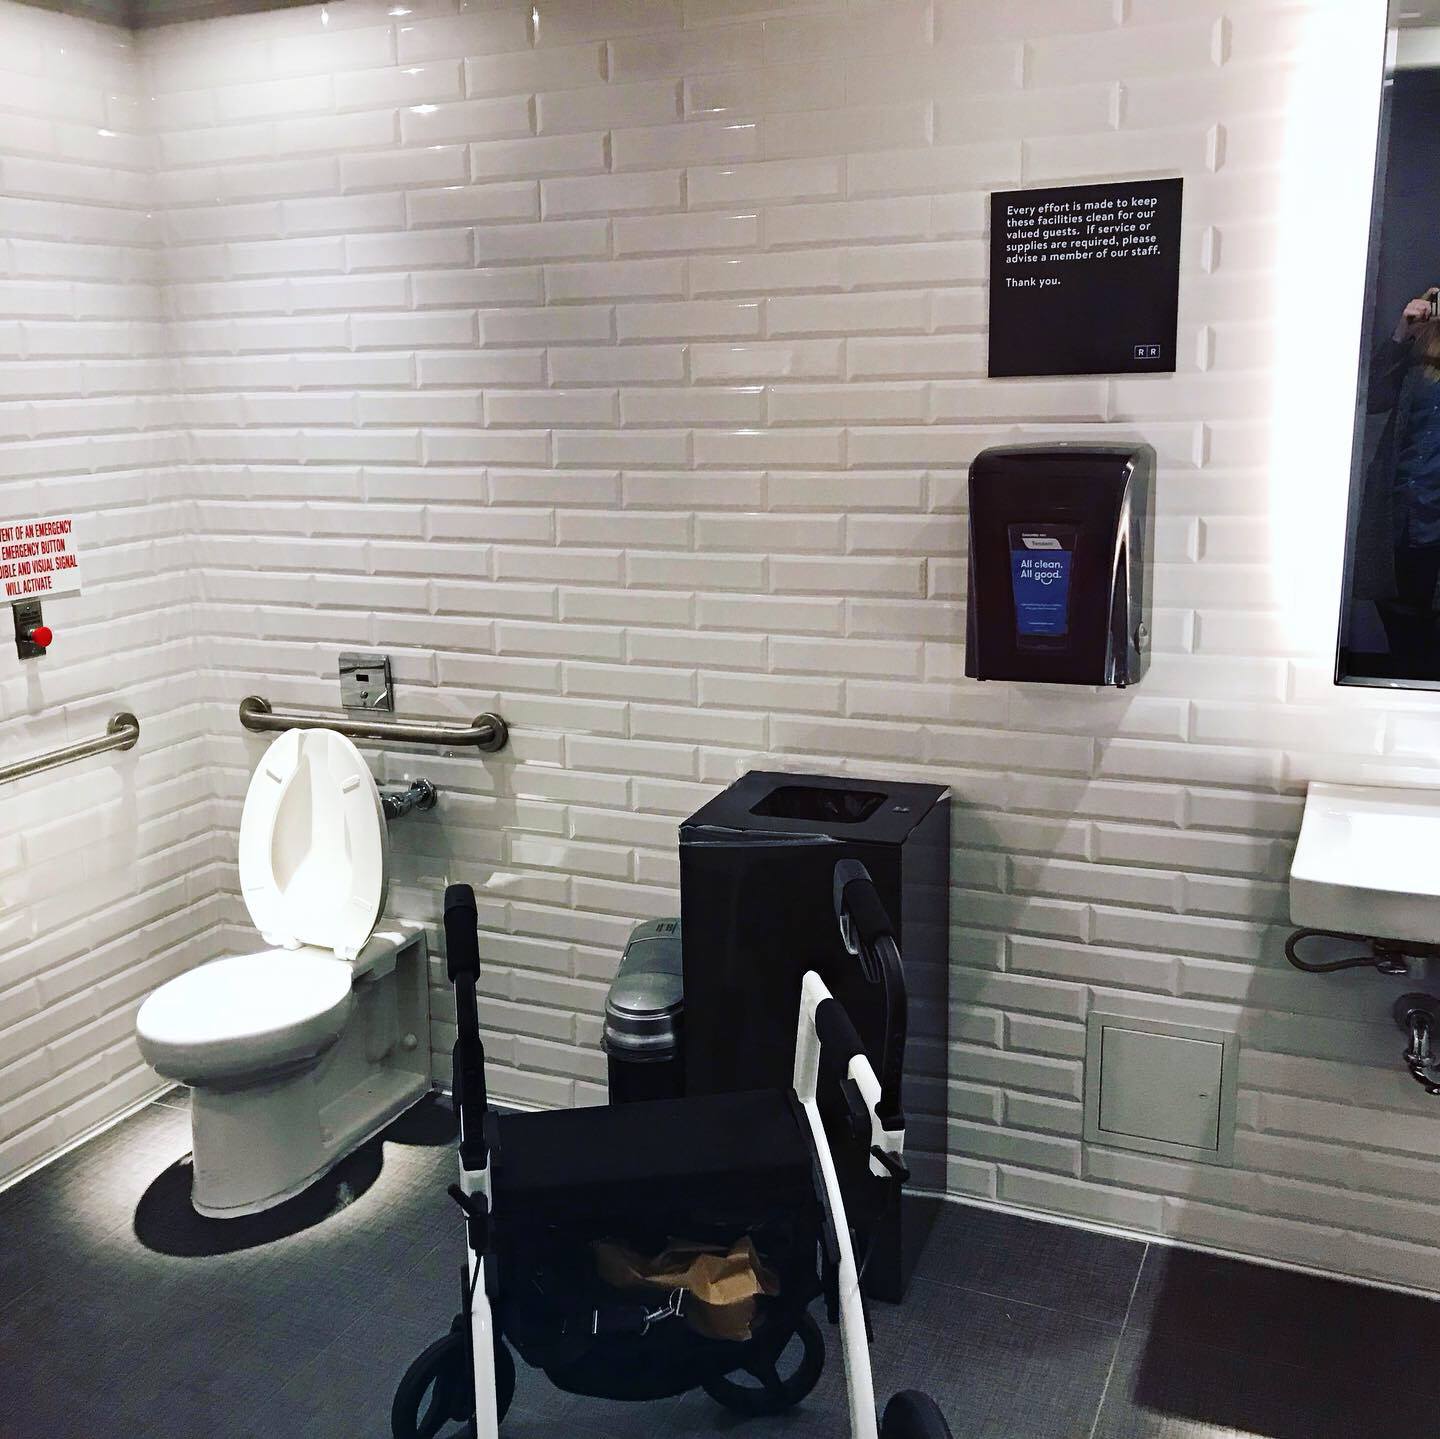 The interior of the accessible washroom which shows a large white room with railing, a toilet, and a sink that you can wheel under.